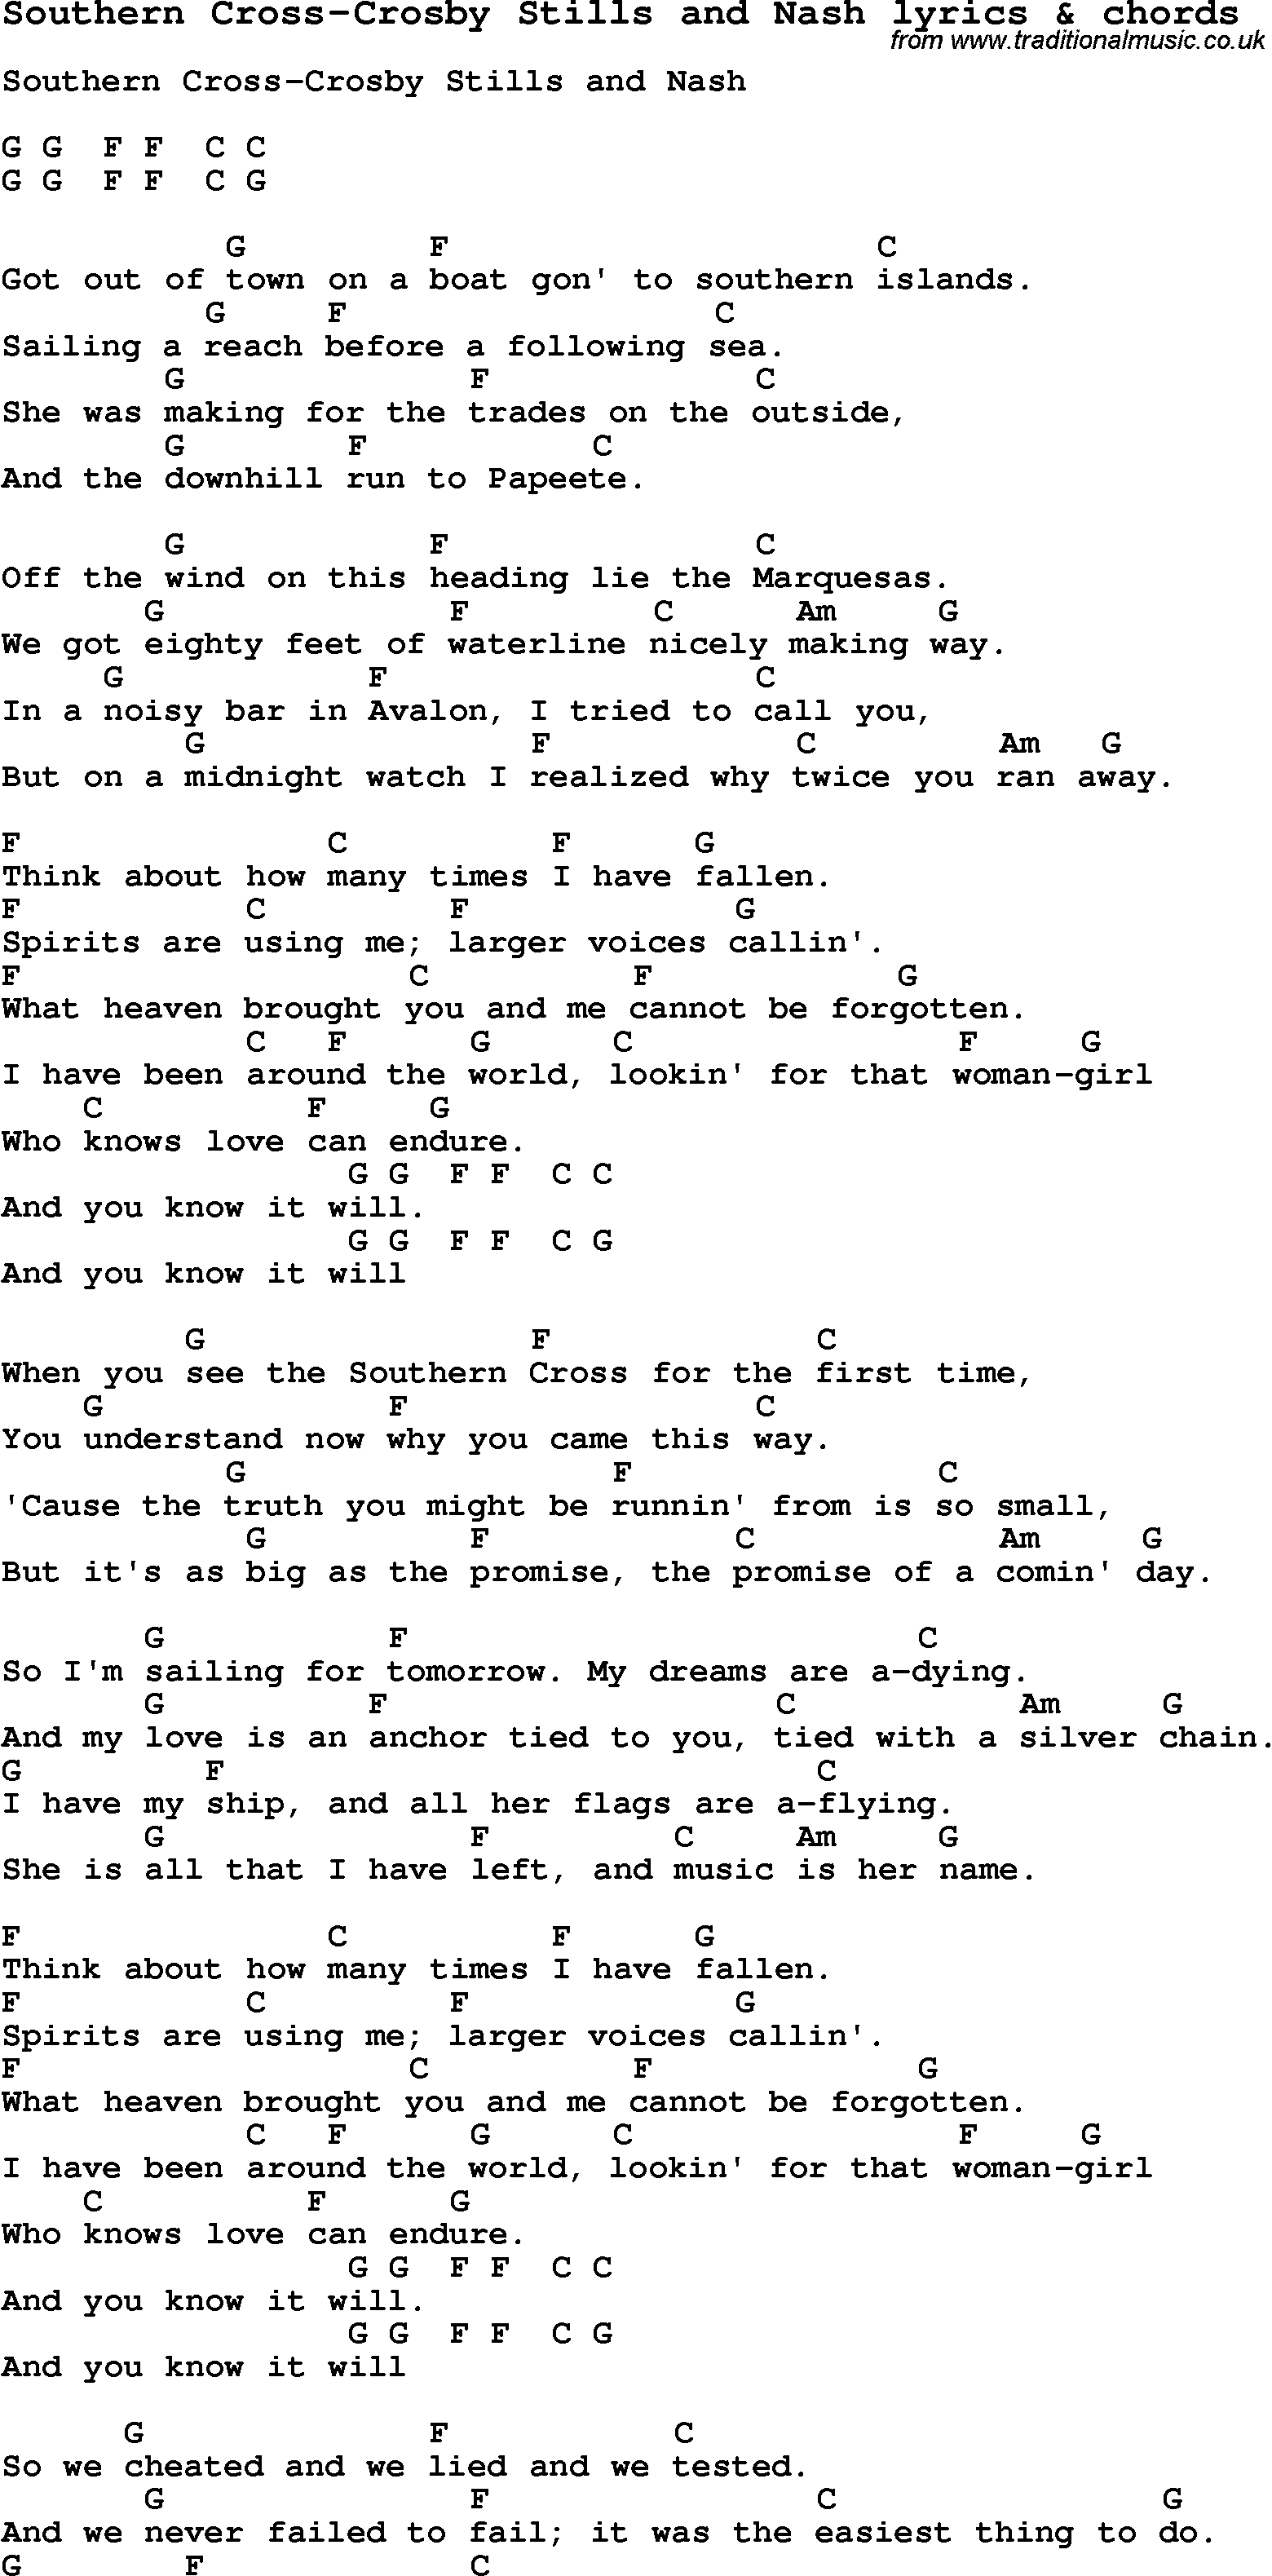 Love Song Lyrics for: Southern Cross-Crosby Stills and Nash with chords for Ukulele, Guitar Banjo etc.